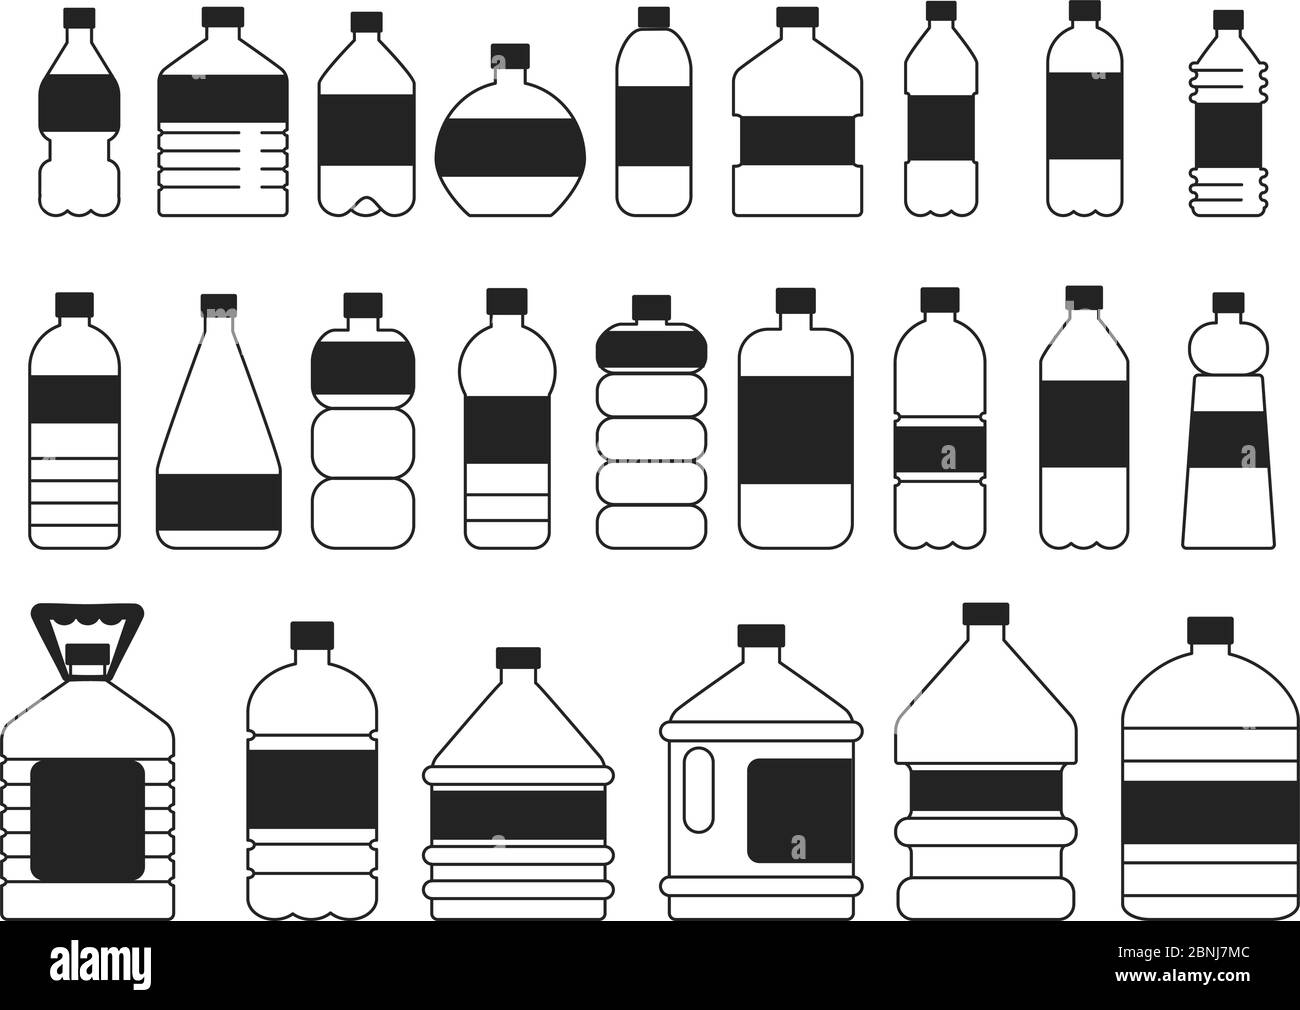 Monochrome pictures set of plastic bottles. Symbols of packaging Stock Vector